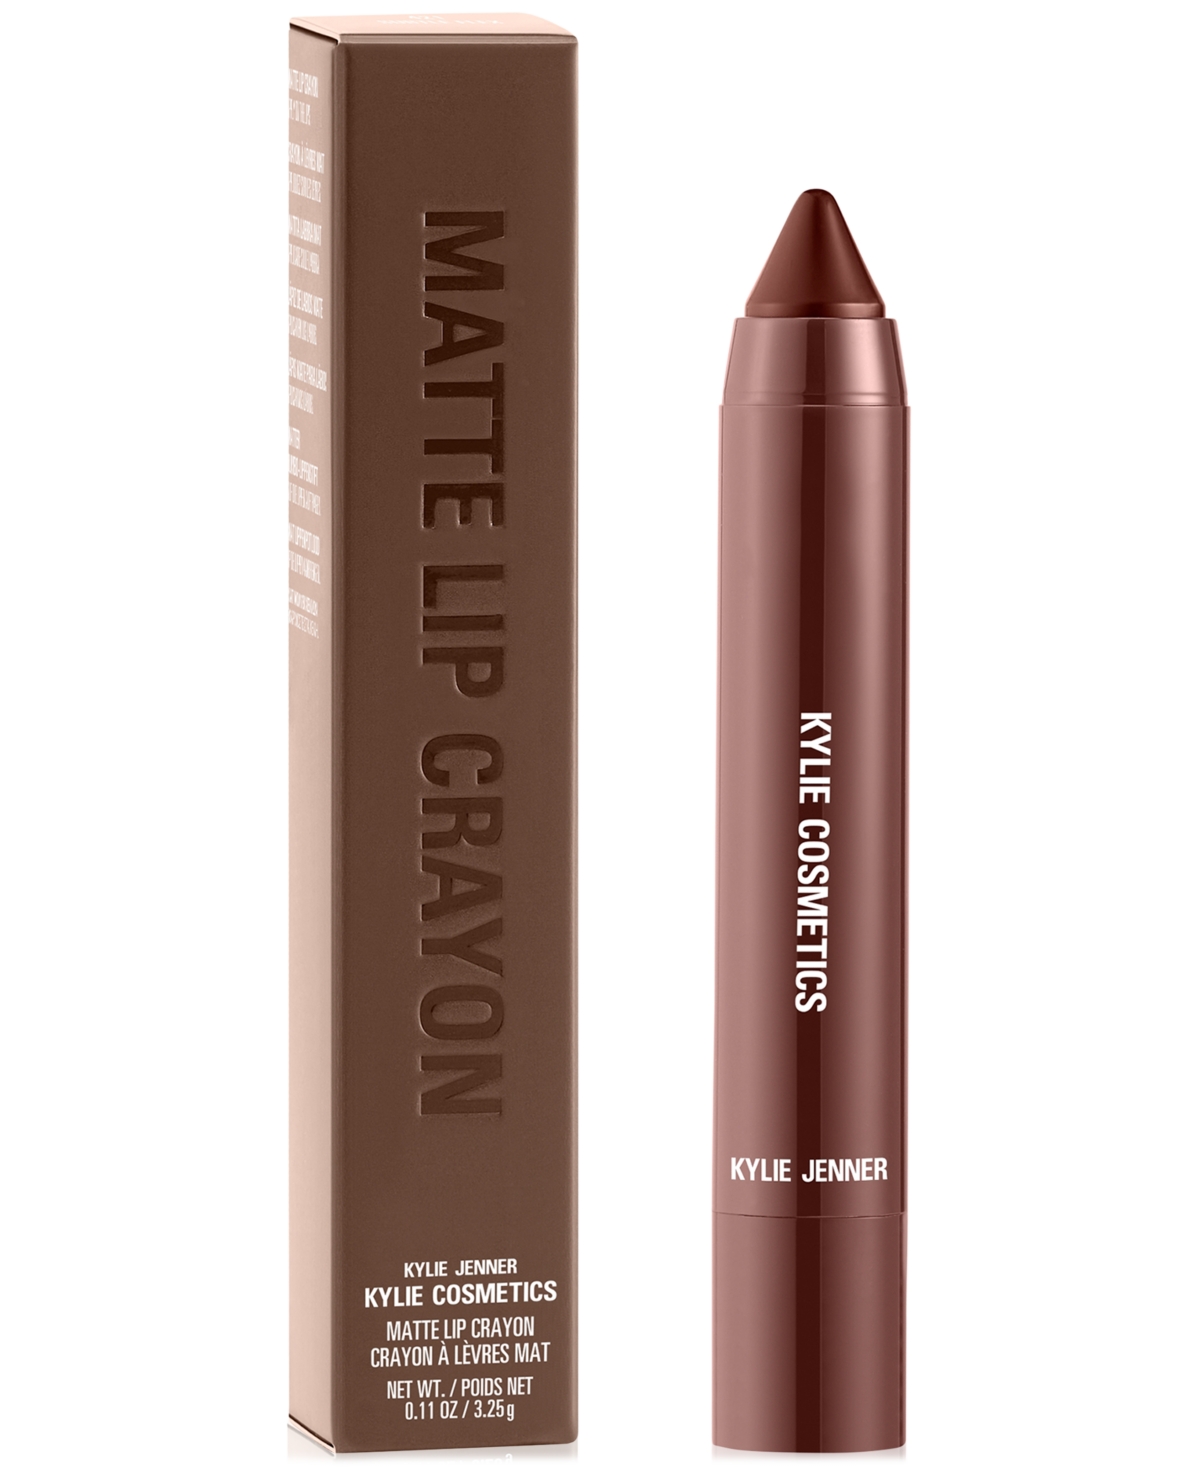 Kylie Cosmetics Matte Lip Crayon In Thanks For Nothing (greige Brown)